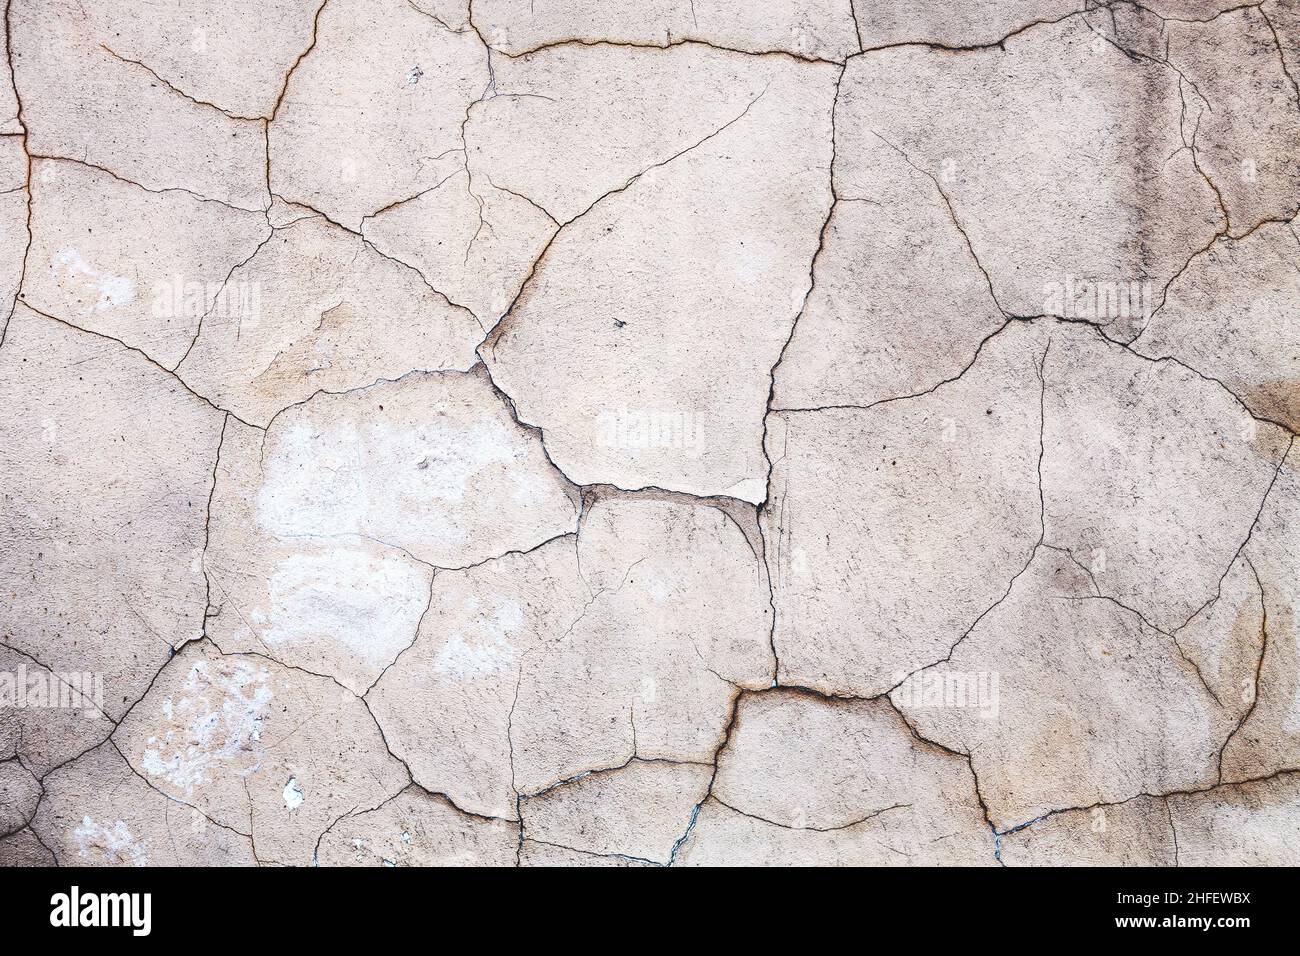 Abstract concrete, weathered with cracks and scratches. Landscape style. Great background or texture. Stock Photo